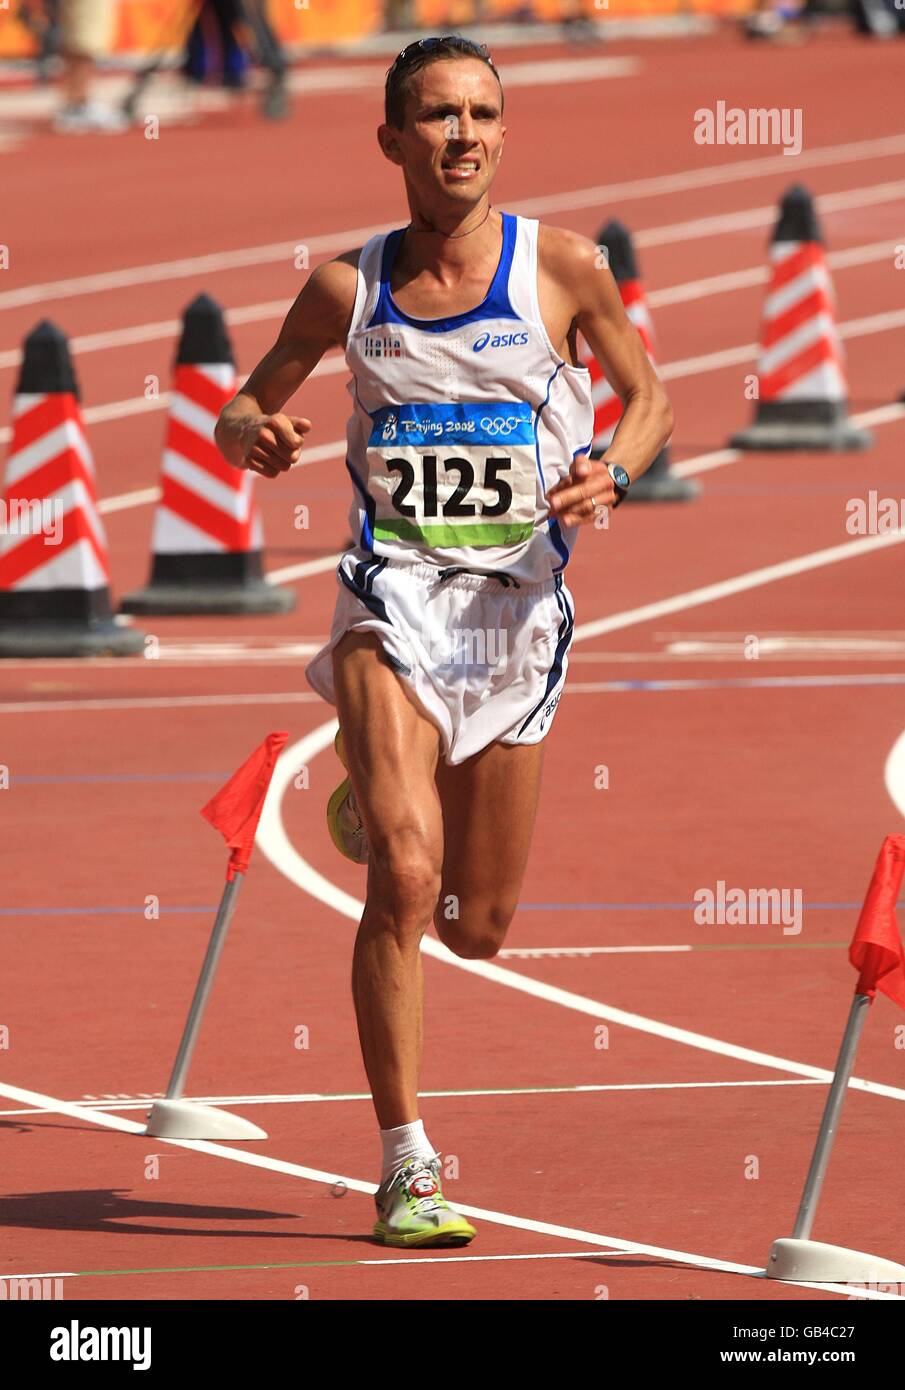 Italy's Ruggero Pertile runs in the men's marathon in the National Stadium on day 16 of the 2008 Olympic Games in Beijing. Stock Photo